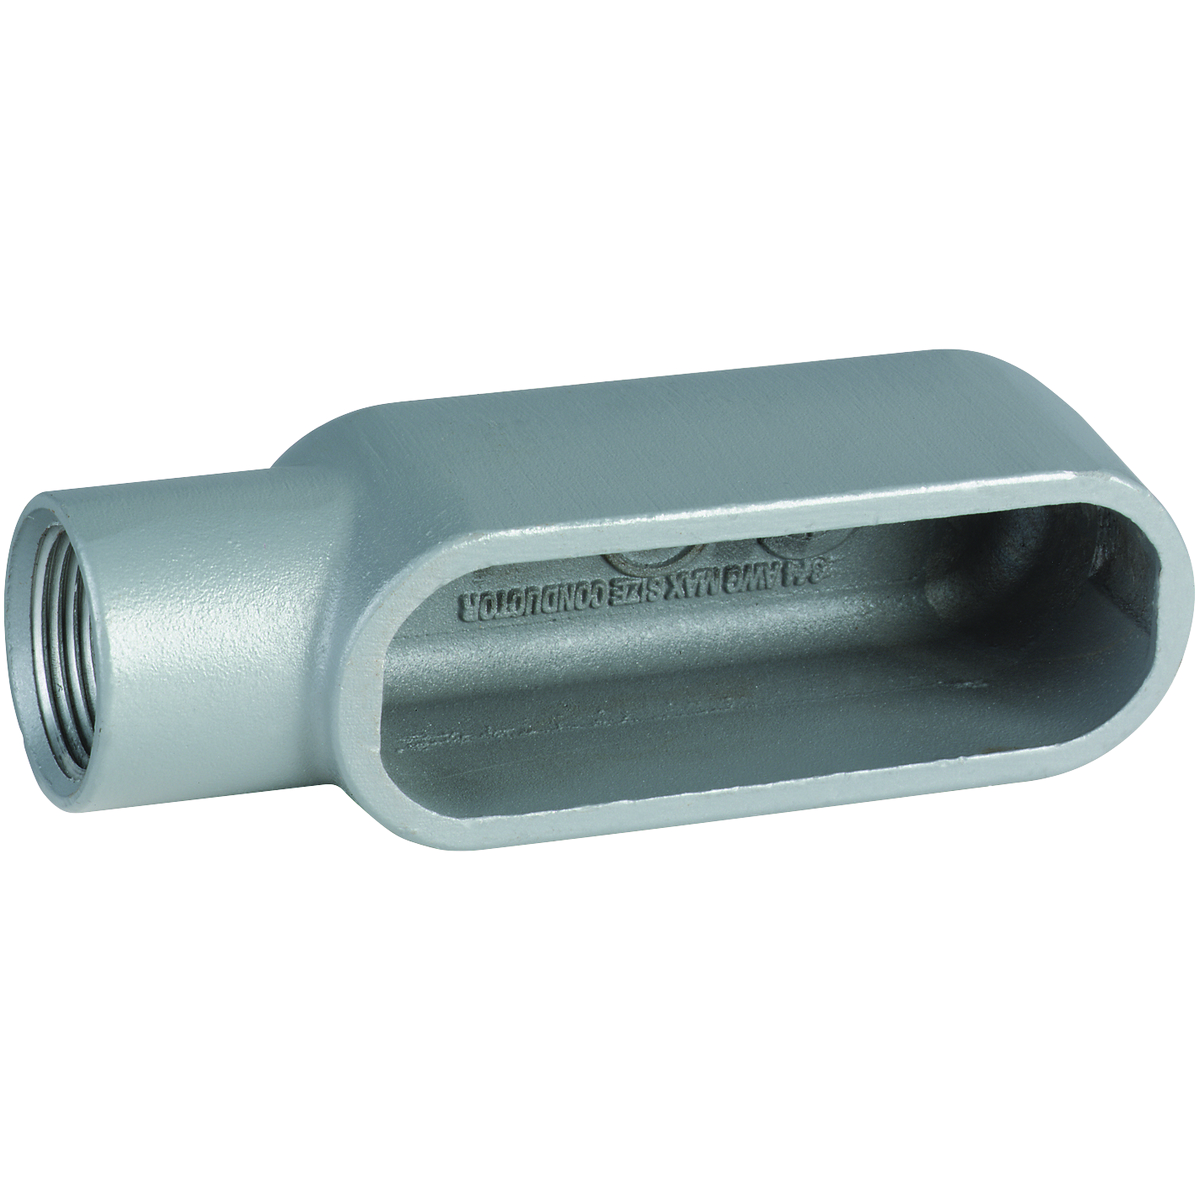 DURALOY 7 SERIES - IRON CONDUIT BODY - E TYPE - HUB SIZE 1/2 INCH -VOLUME 4.0 CUBIC INCHES